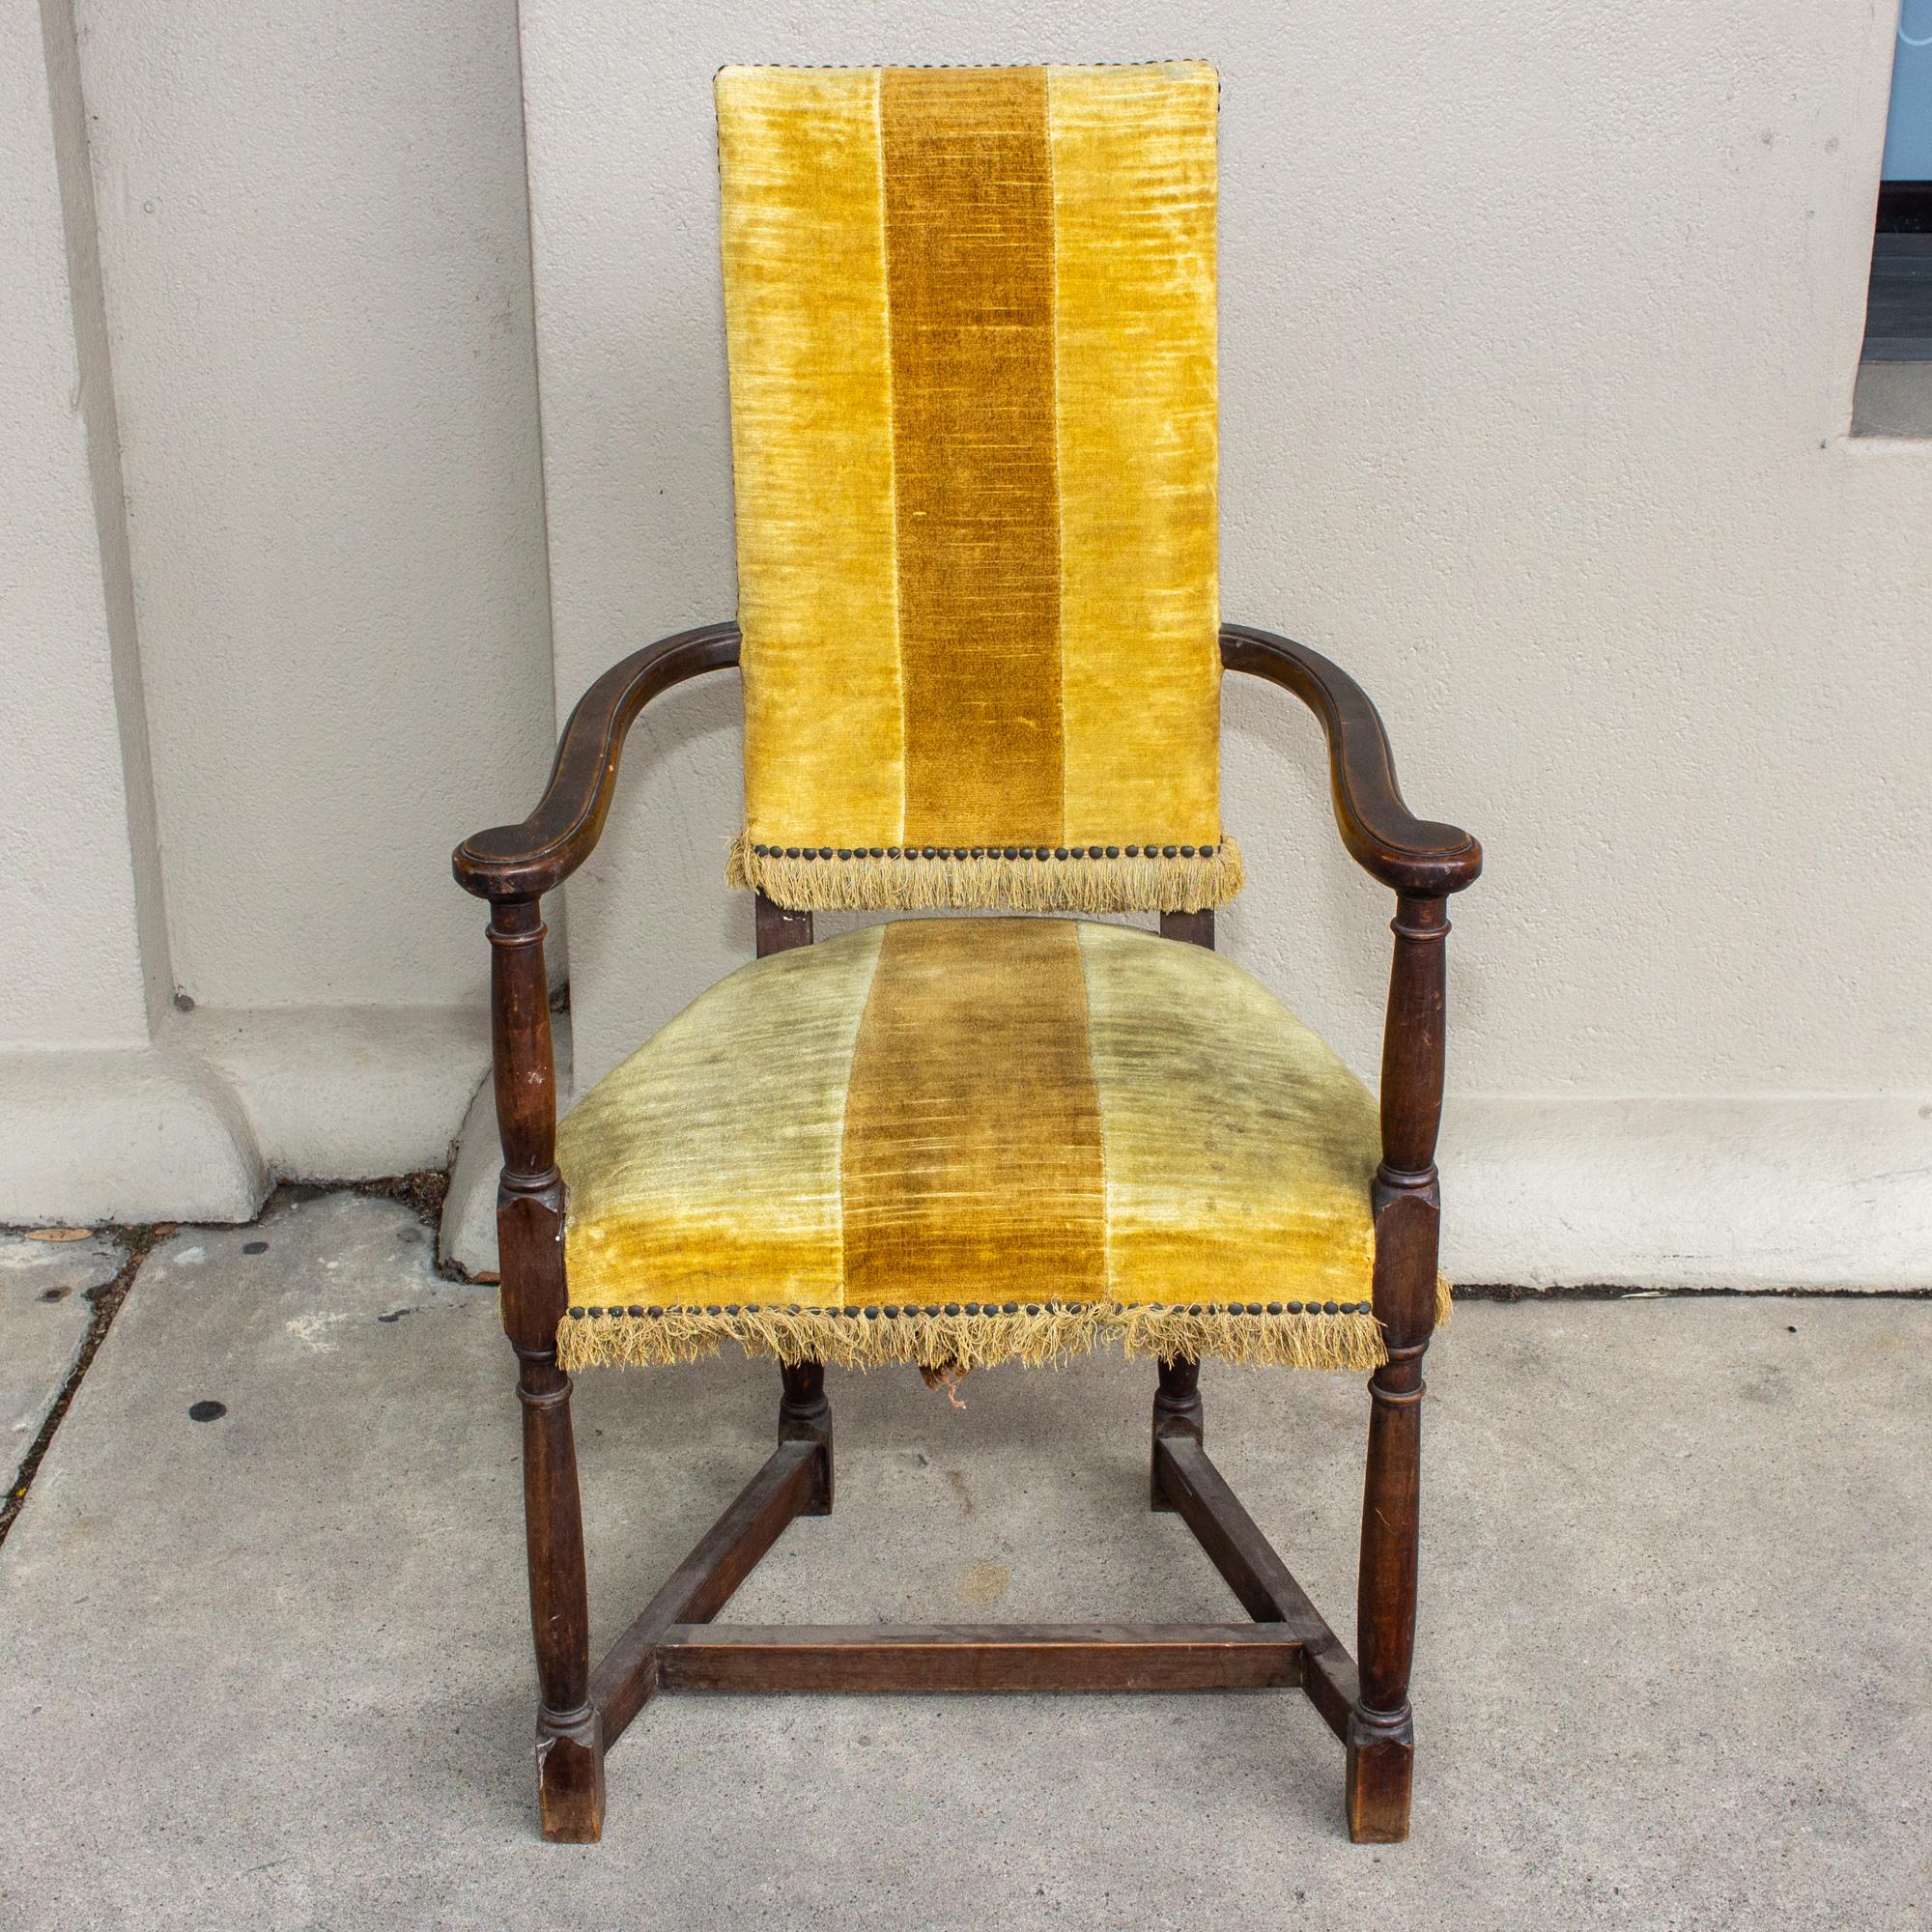 This antique Spanish chair is crafted with an oak frame and upholstered in a yellow velvet striped fabric with fringe detail and brass nail-head accents. The golden yellow stripe is wide with a deeper mustard shade at center and the coordinating